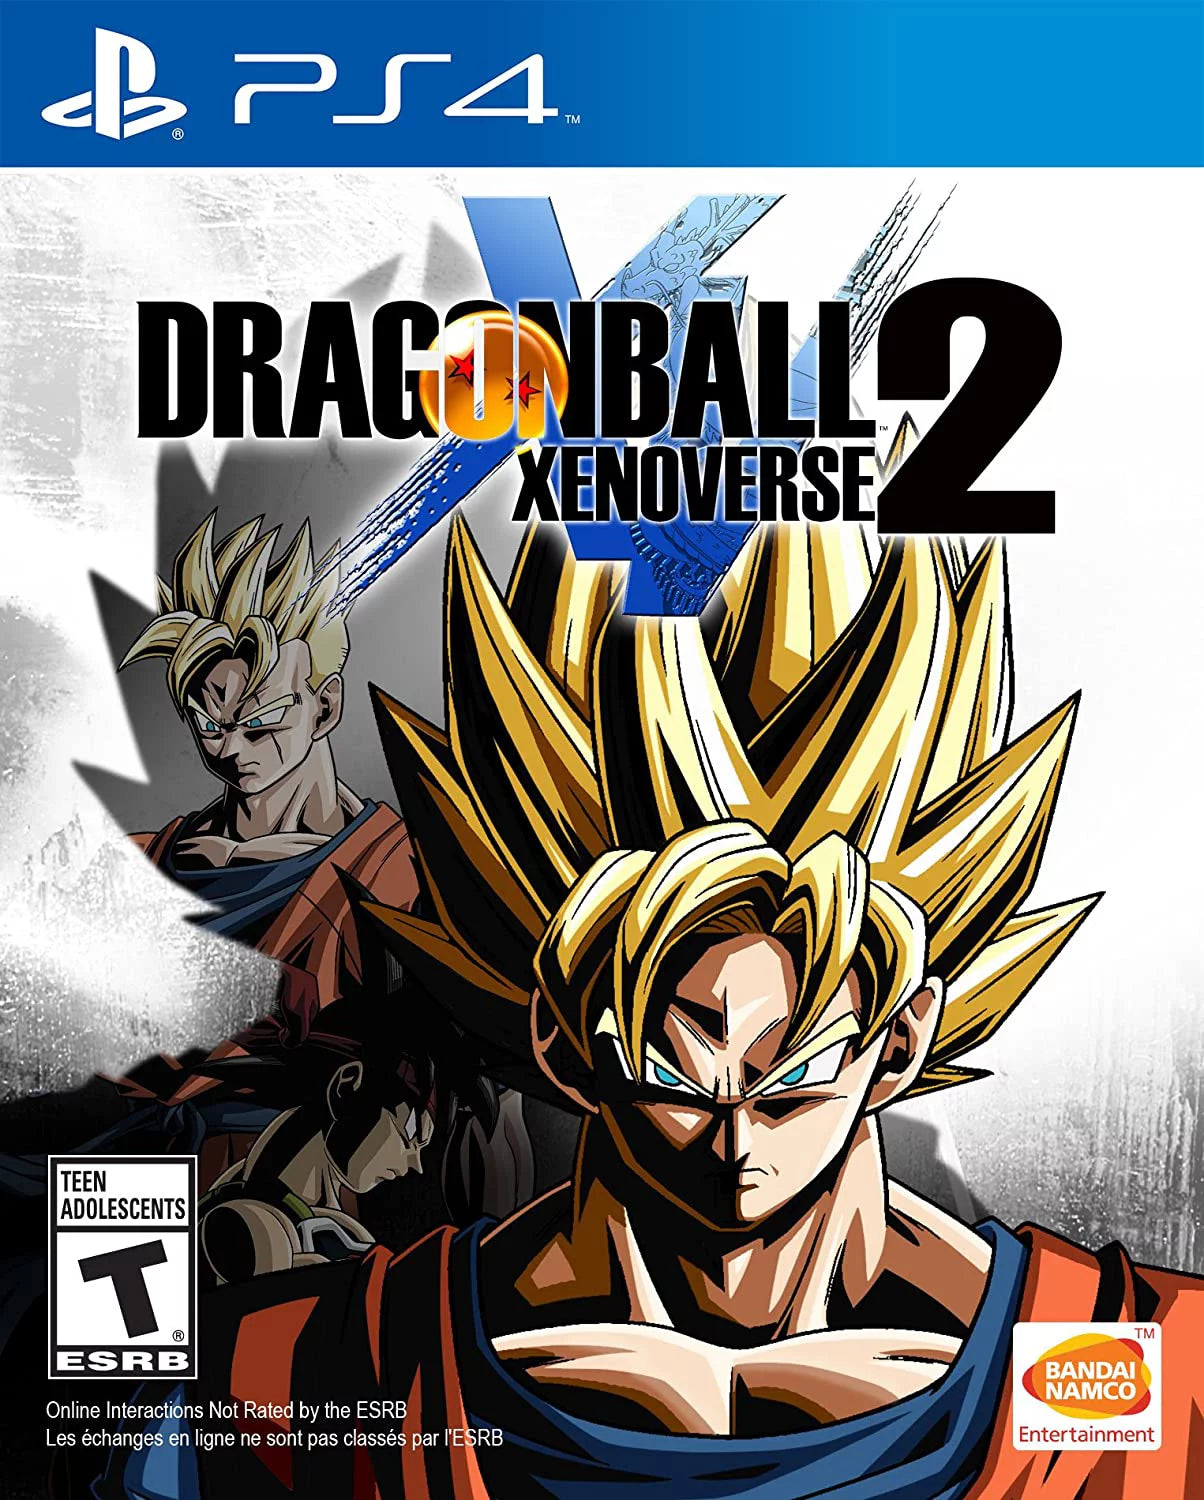 [US][EU] [PS4 Save Progression] - Dragon Ball Xenoverse 2 Modded Save Akirac Other Mods Seasonal and Non Seasonal Save Mod - Modded Items and Gear - Hacks - Cheats - Trainers for Playstation 4 - Playstation 5 - Nintendo Switch - Xbox One